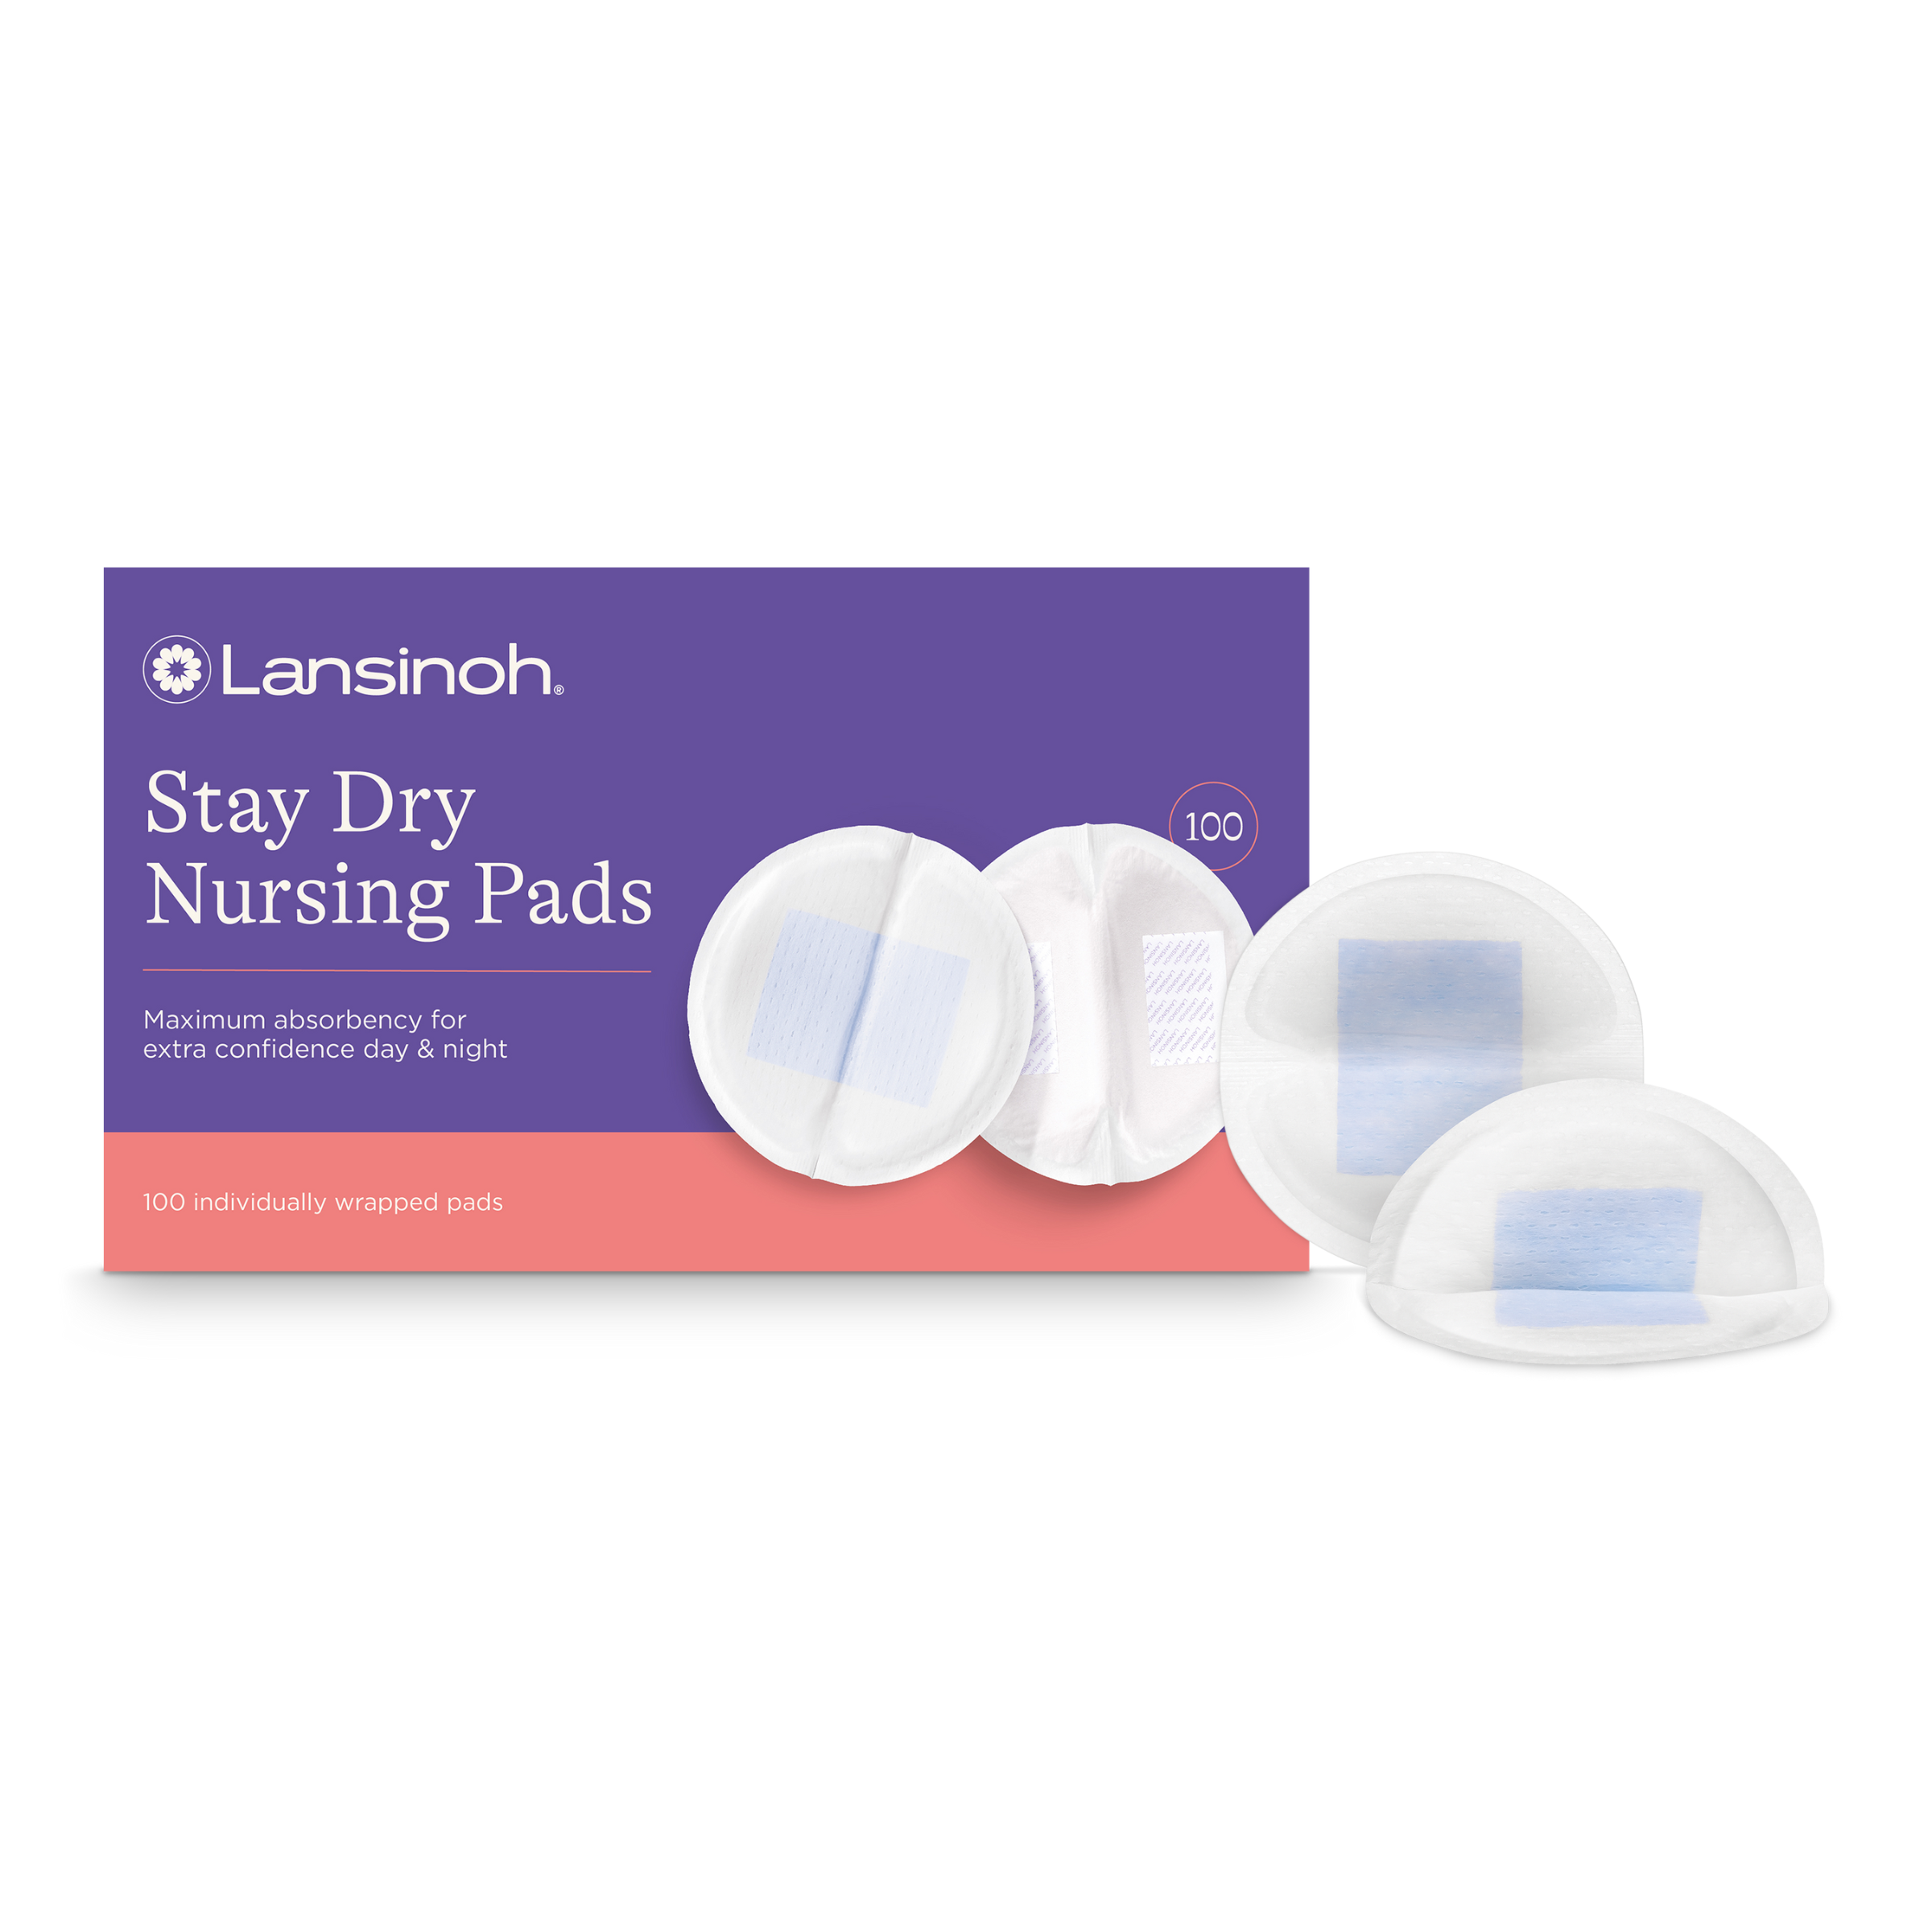 Lansinoh Stay Dry Disposable Nursing Pads for Breastfeeding, 100 Count - image 1 of 12